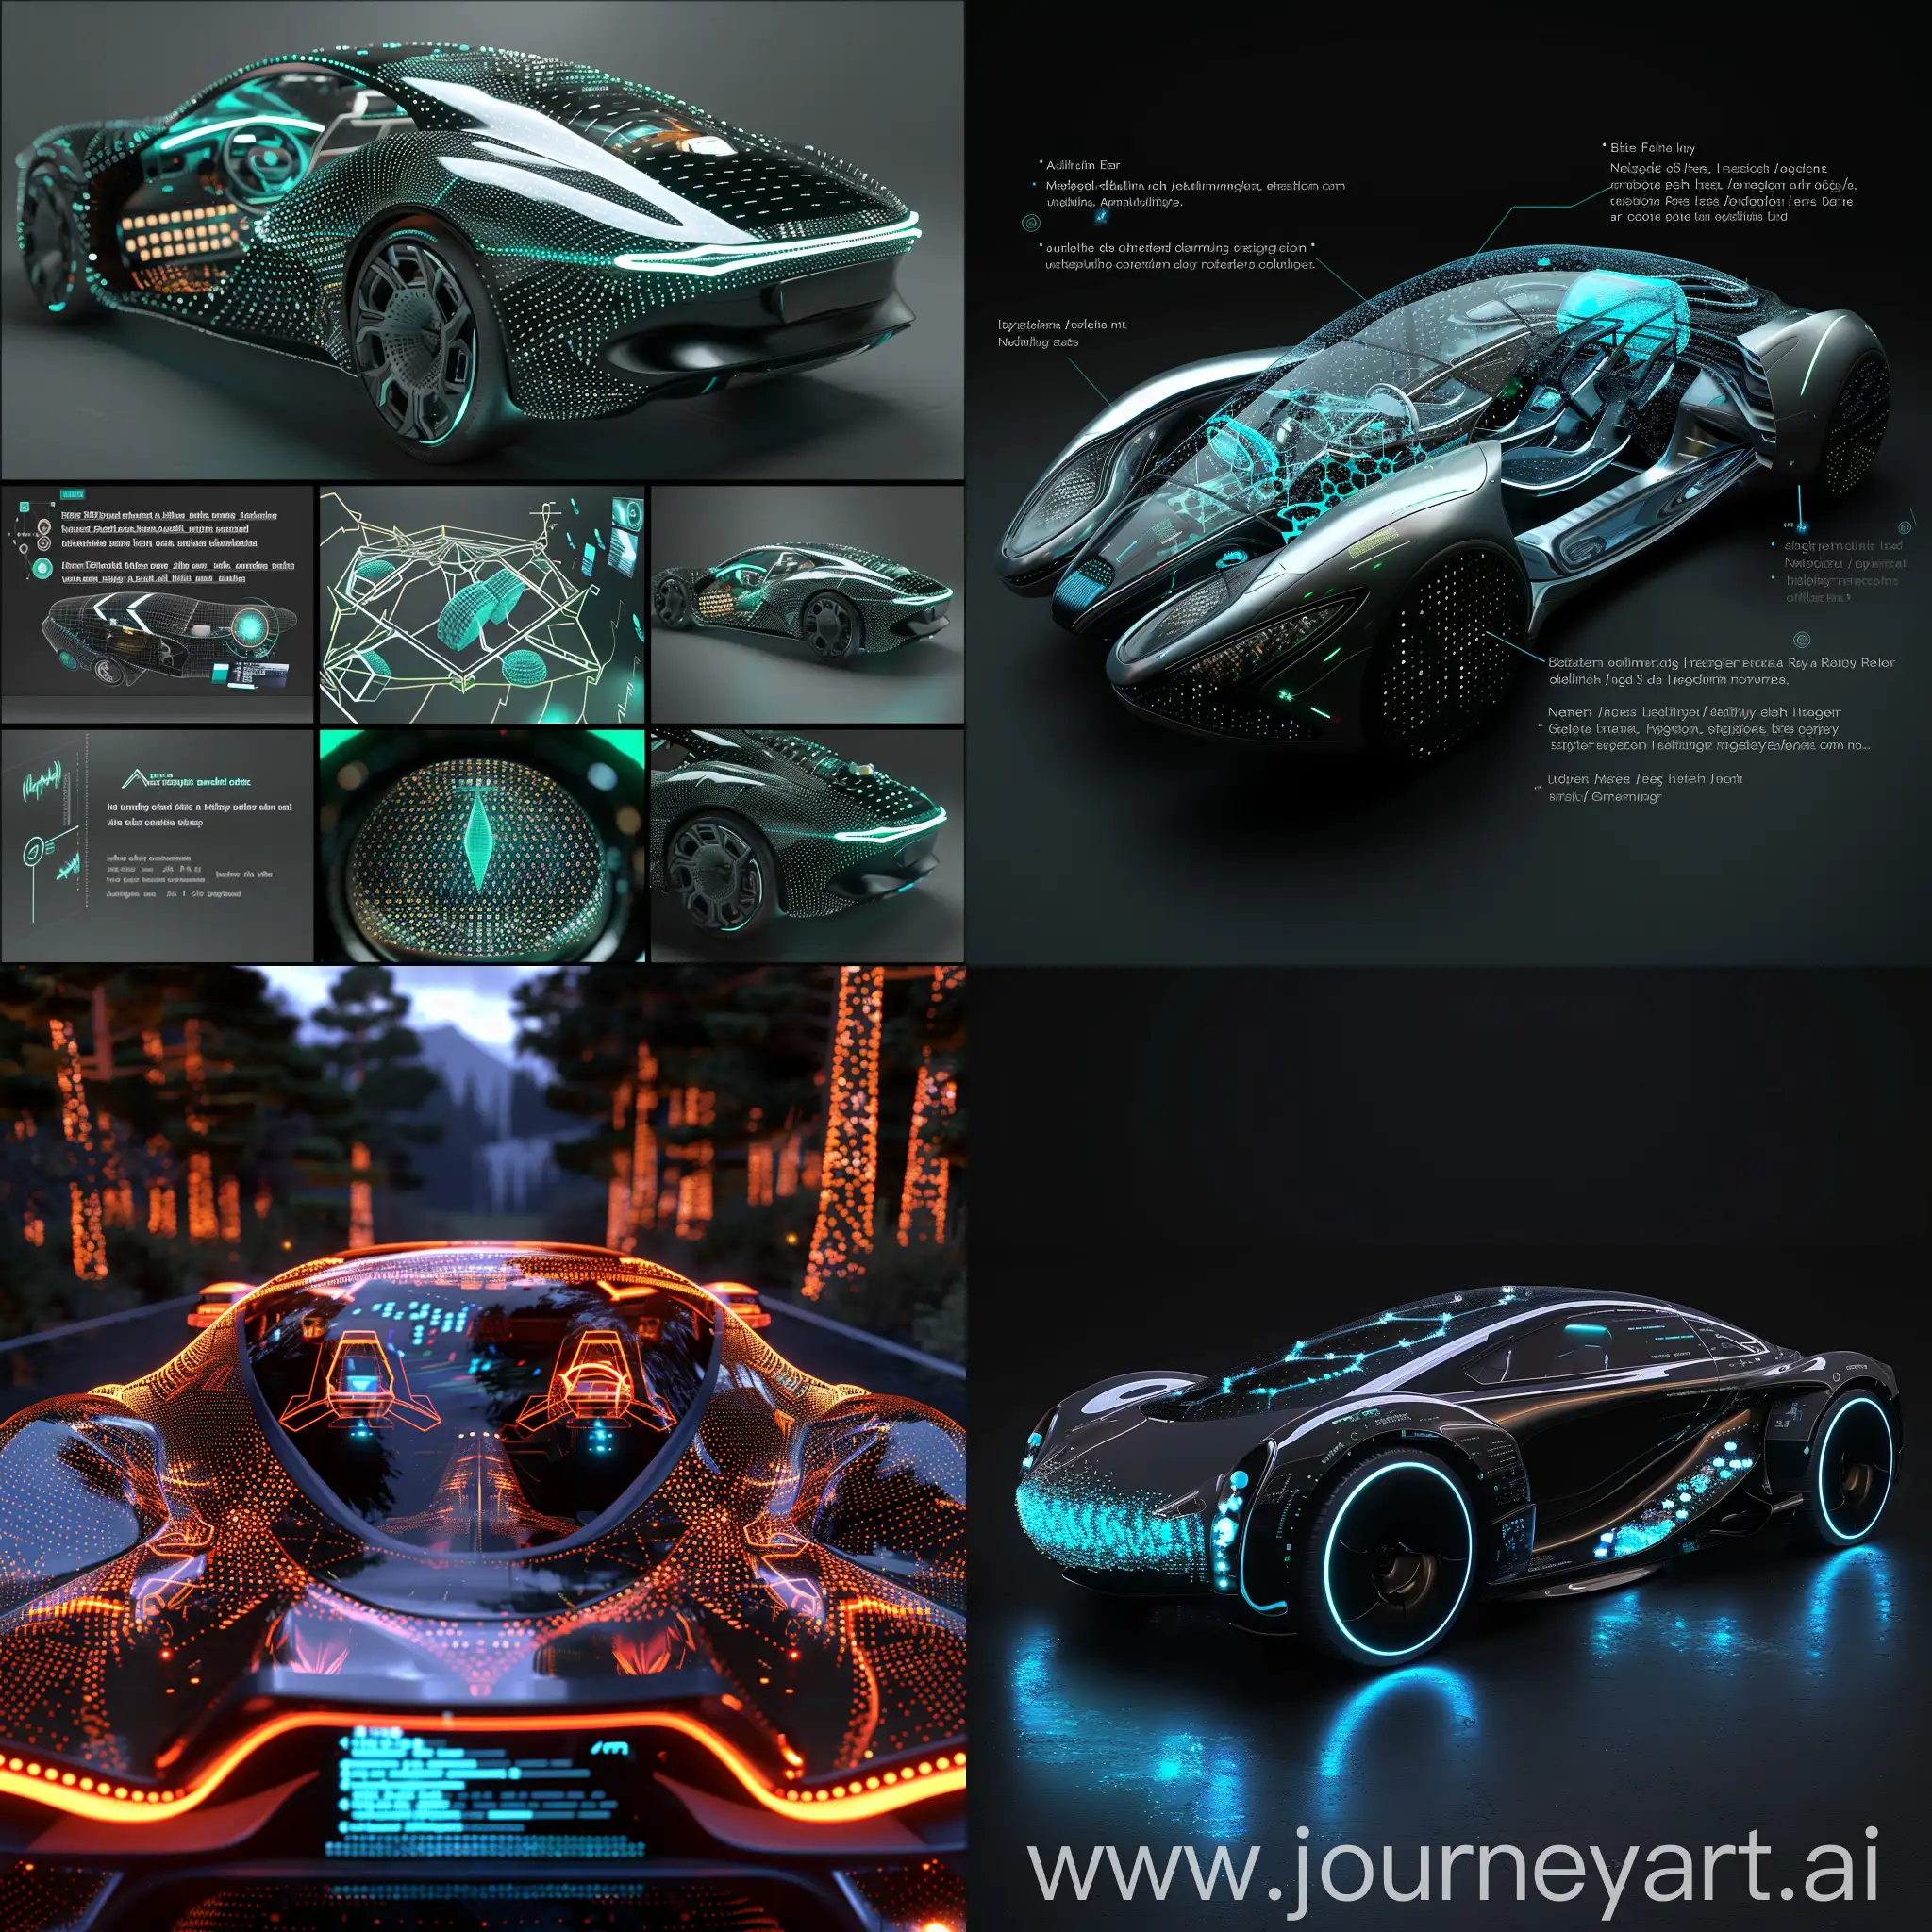 Futuristic-Car-with-Advanced-Biotech-and-Nanotech-Features